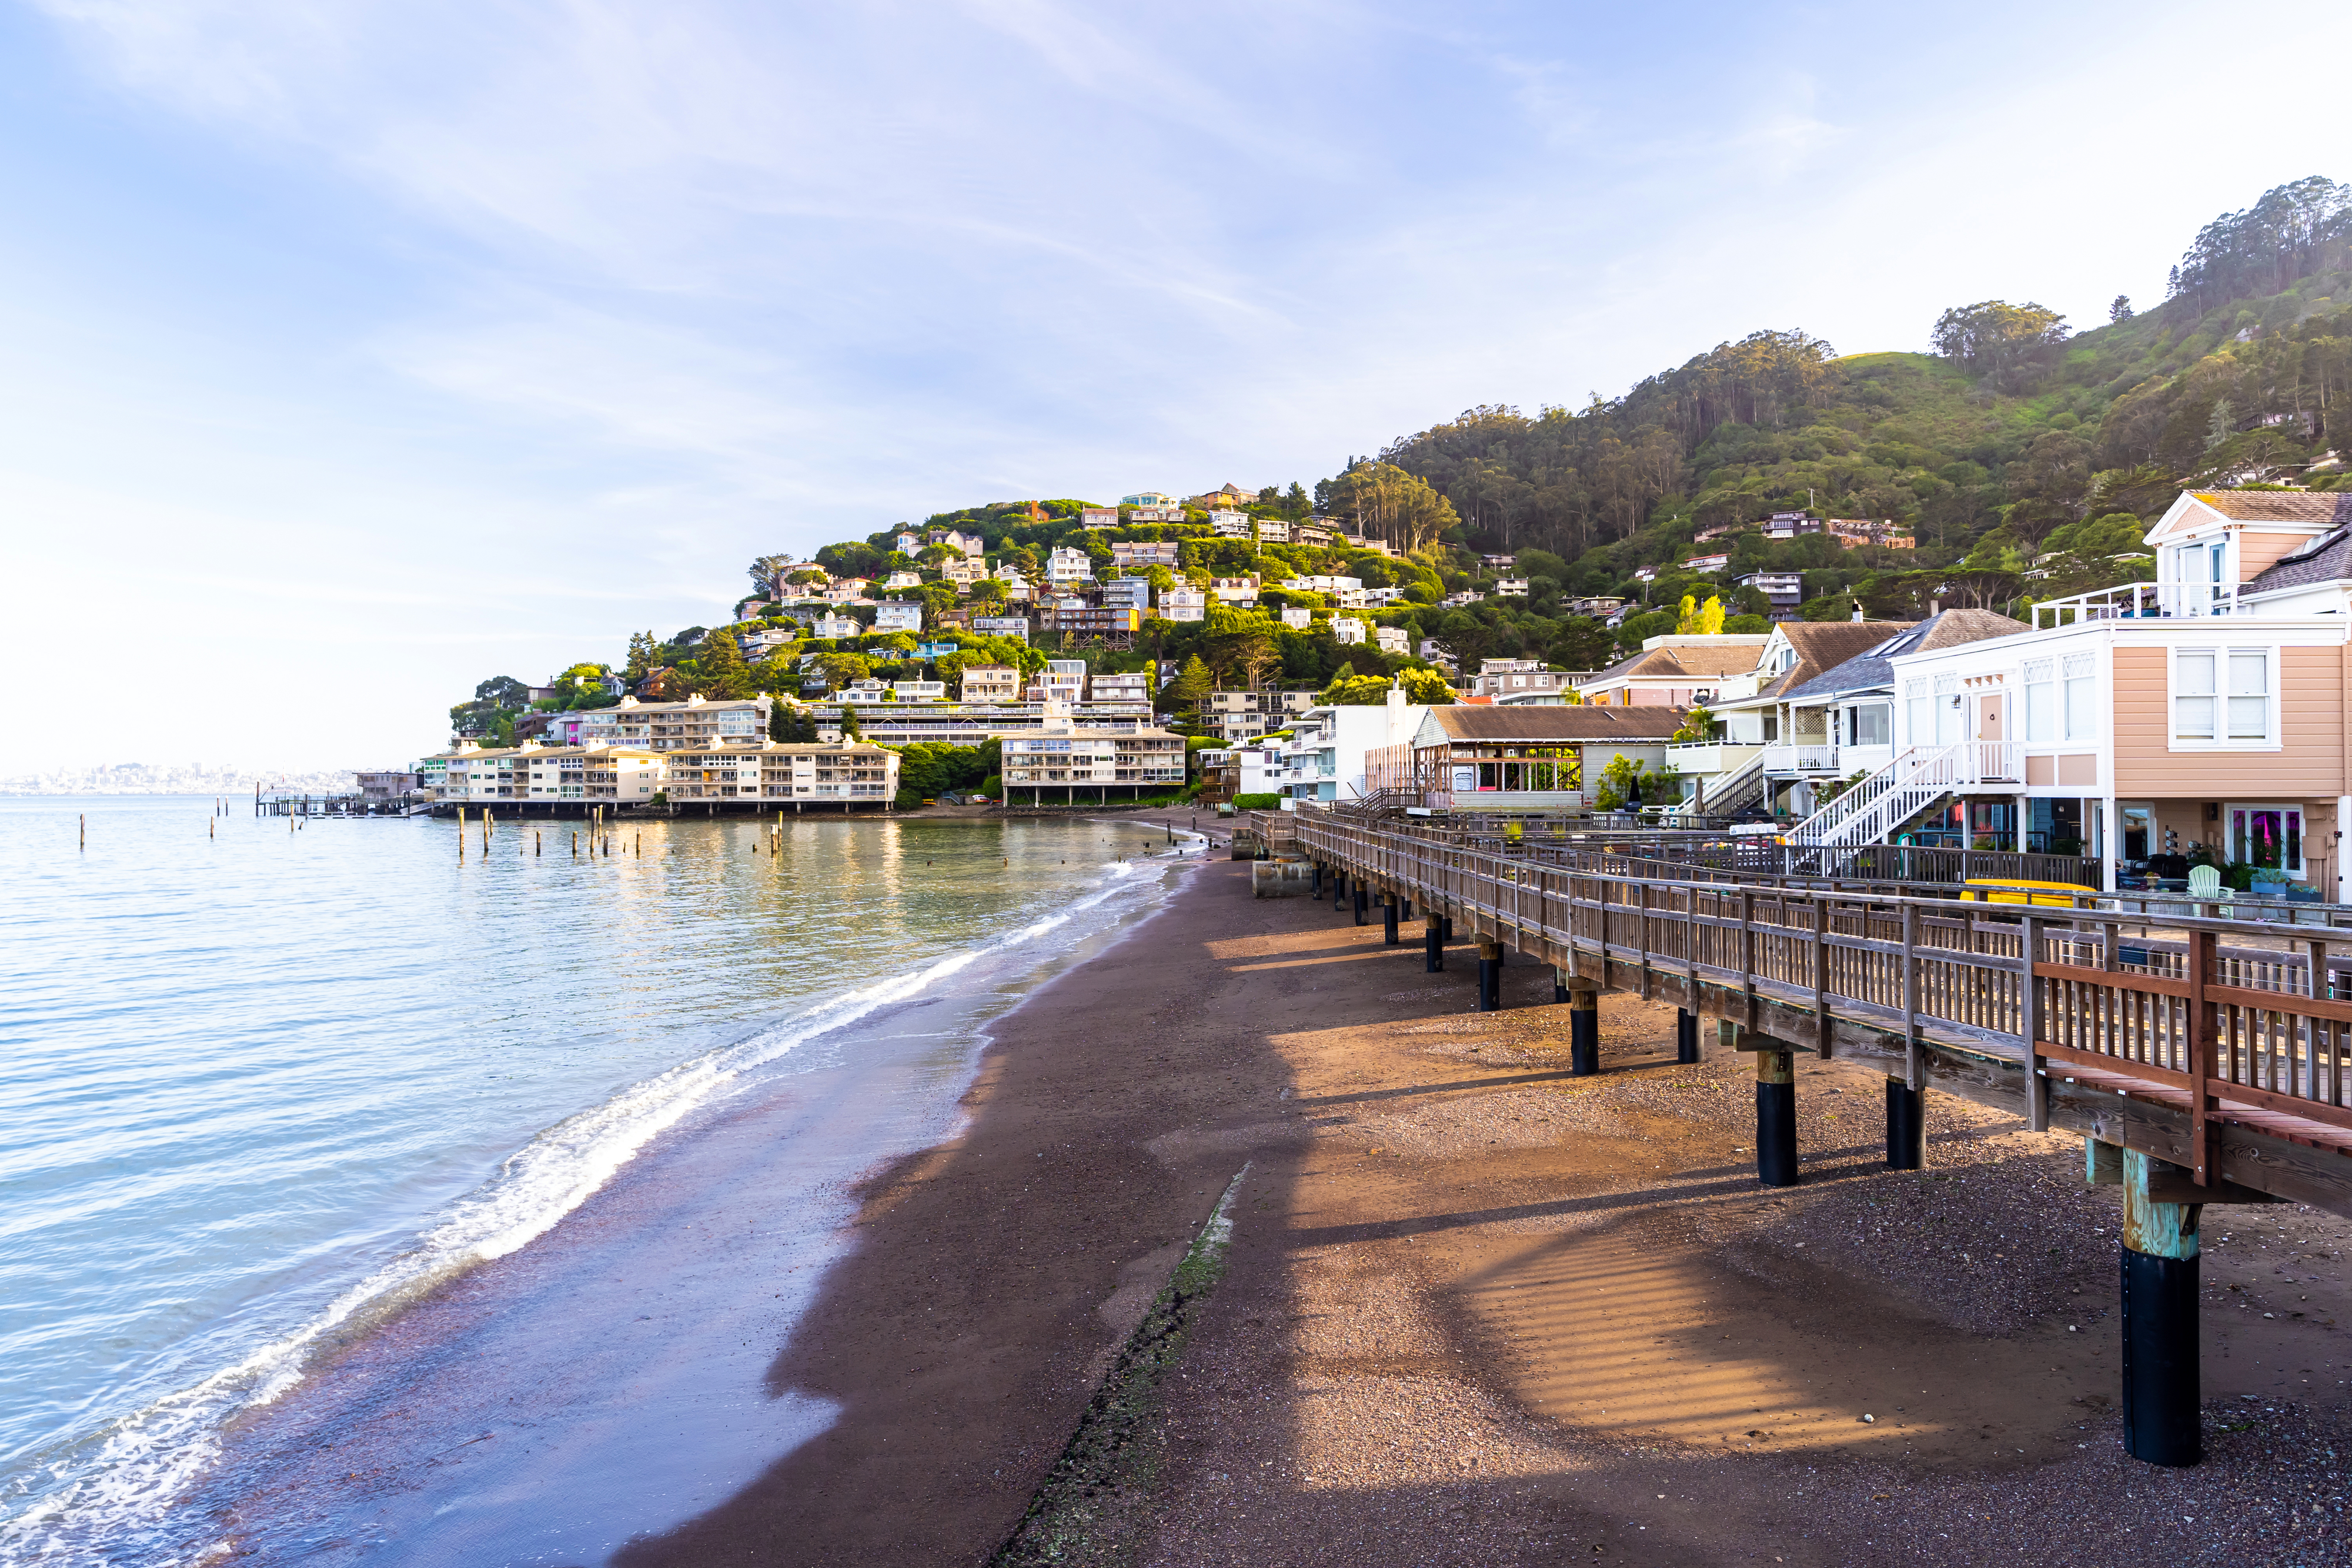 Scenic view of a coastal town with a pier, houses on a hillside, and calm waters